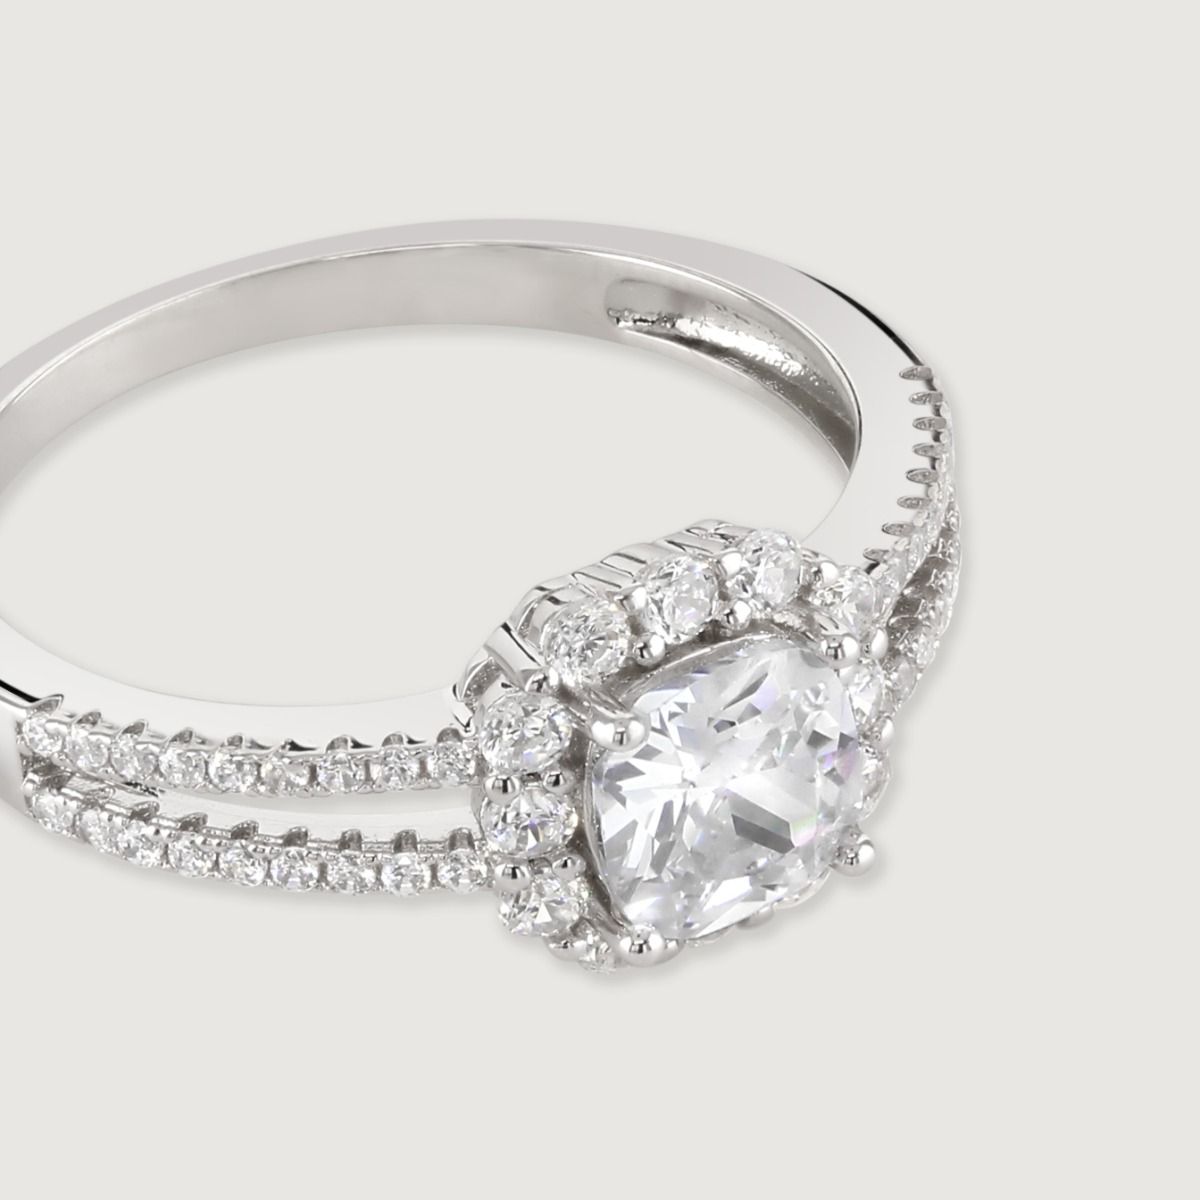 This striking design features a split band adorned with small, dazzling cubic zirconia stones to create a show stopping effect. At the centre lies a cushion cut clear cubic zirconia, multi faceted for maximum sparkle, surrounded with a halo of glittering 